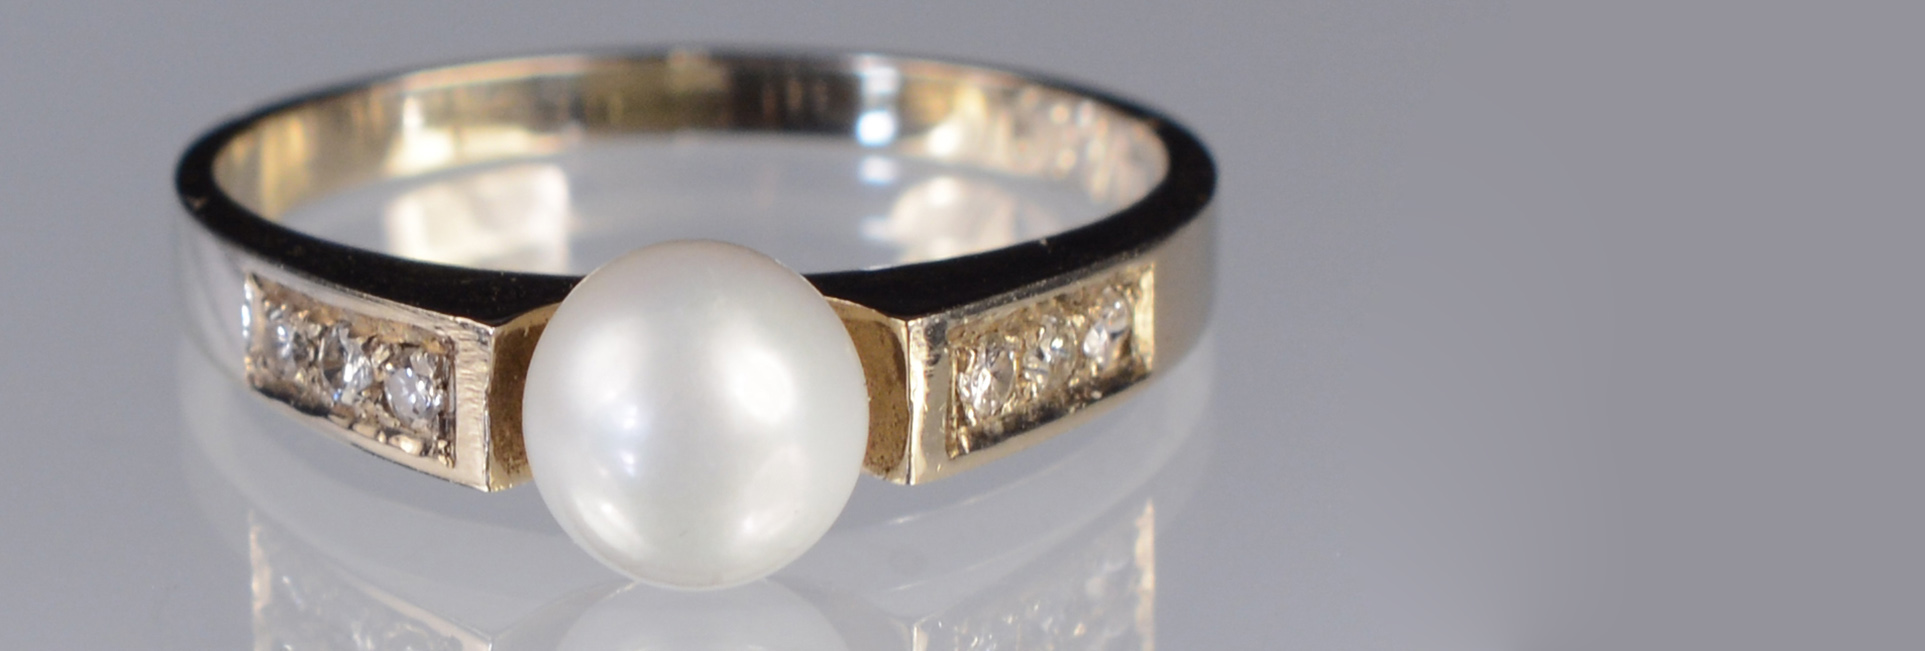 |THE BUYER PREMIUM IN THIS AUCTION JUST 5%| [GOLDEN RING WITH PEARL AND DIAMANTE]